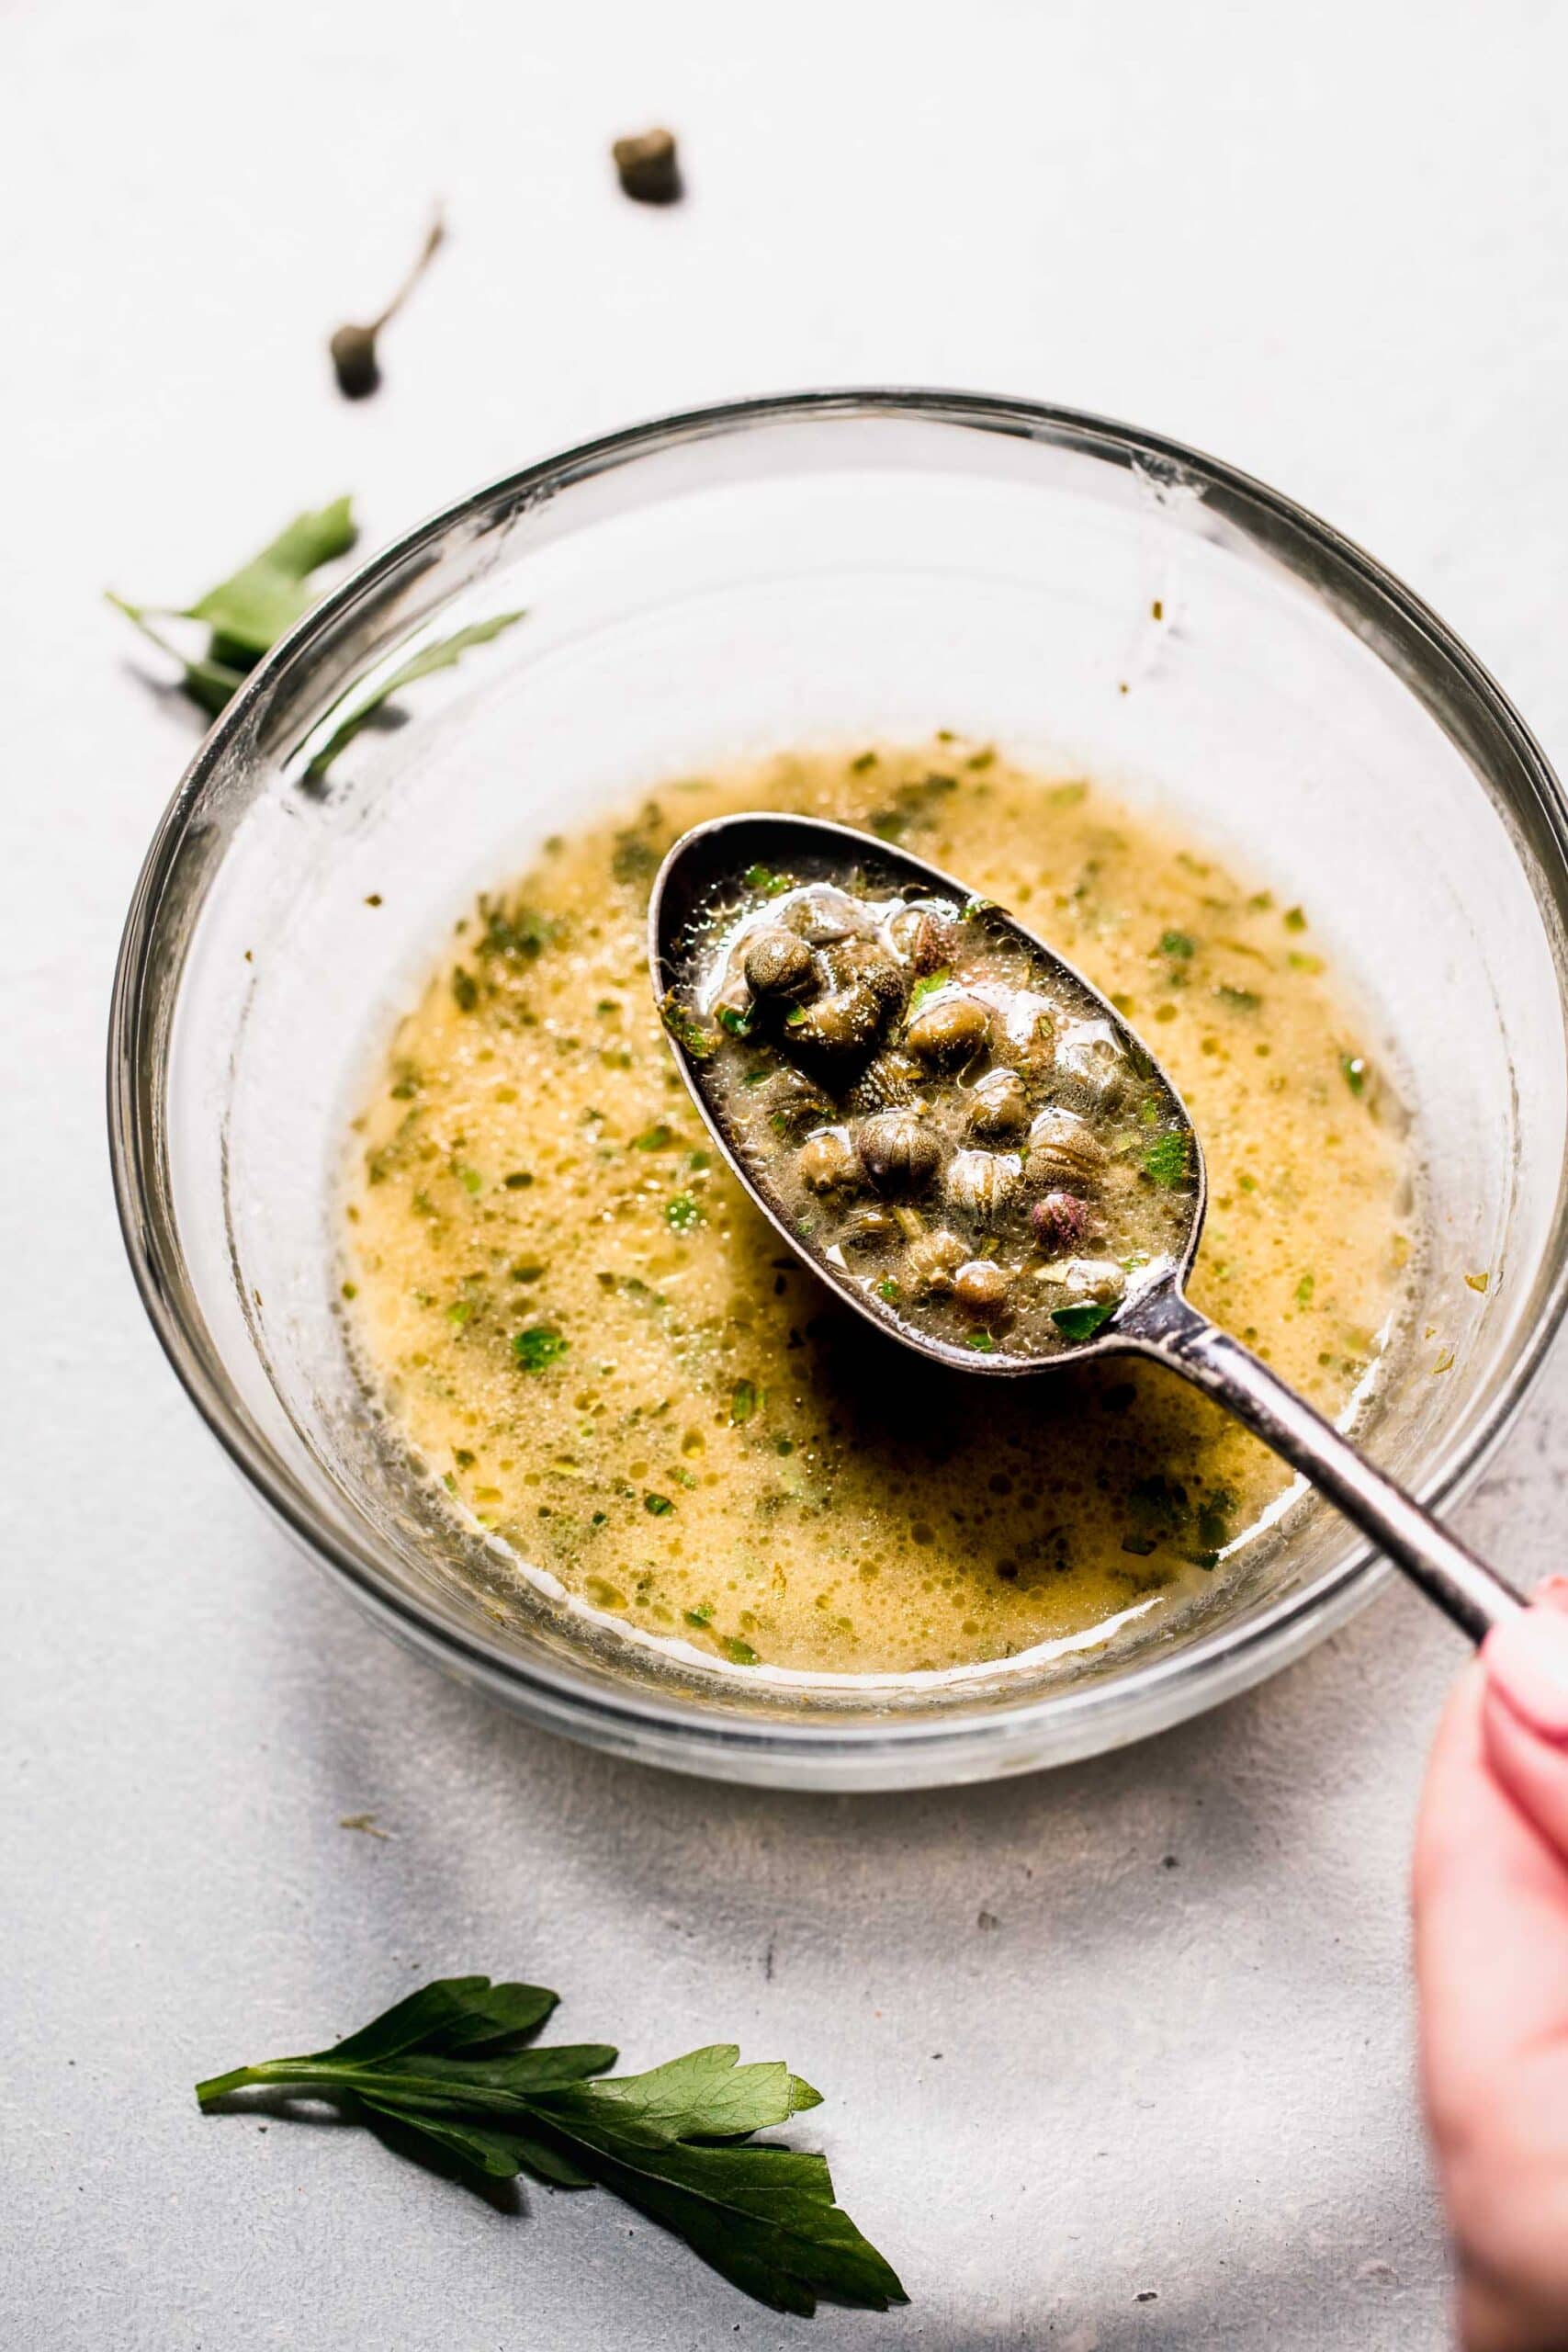 Lemon caper sauce on spoon over small bowl.